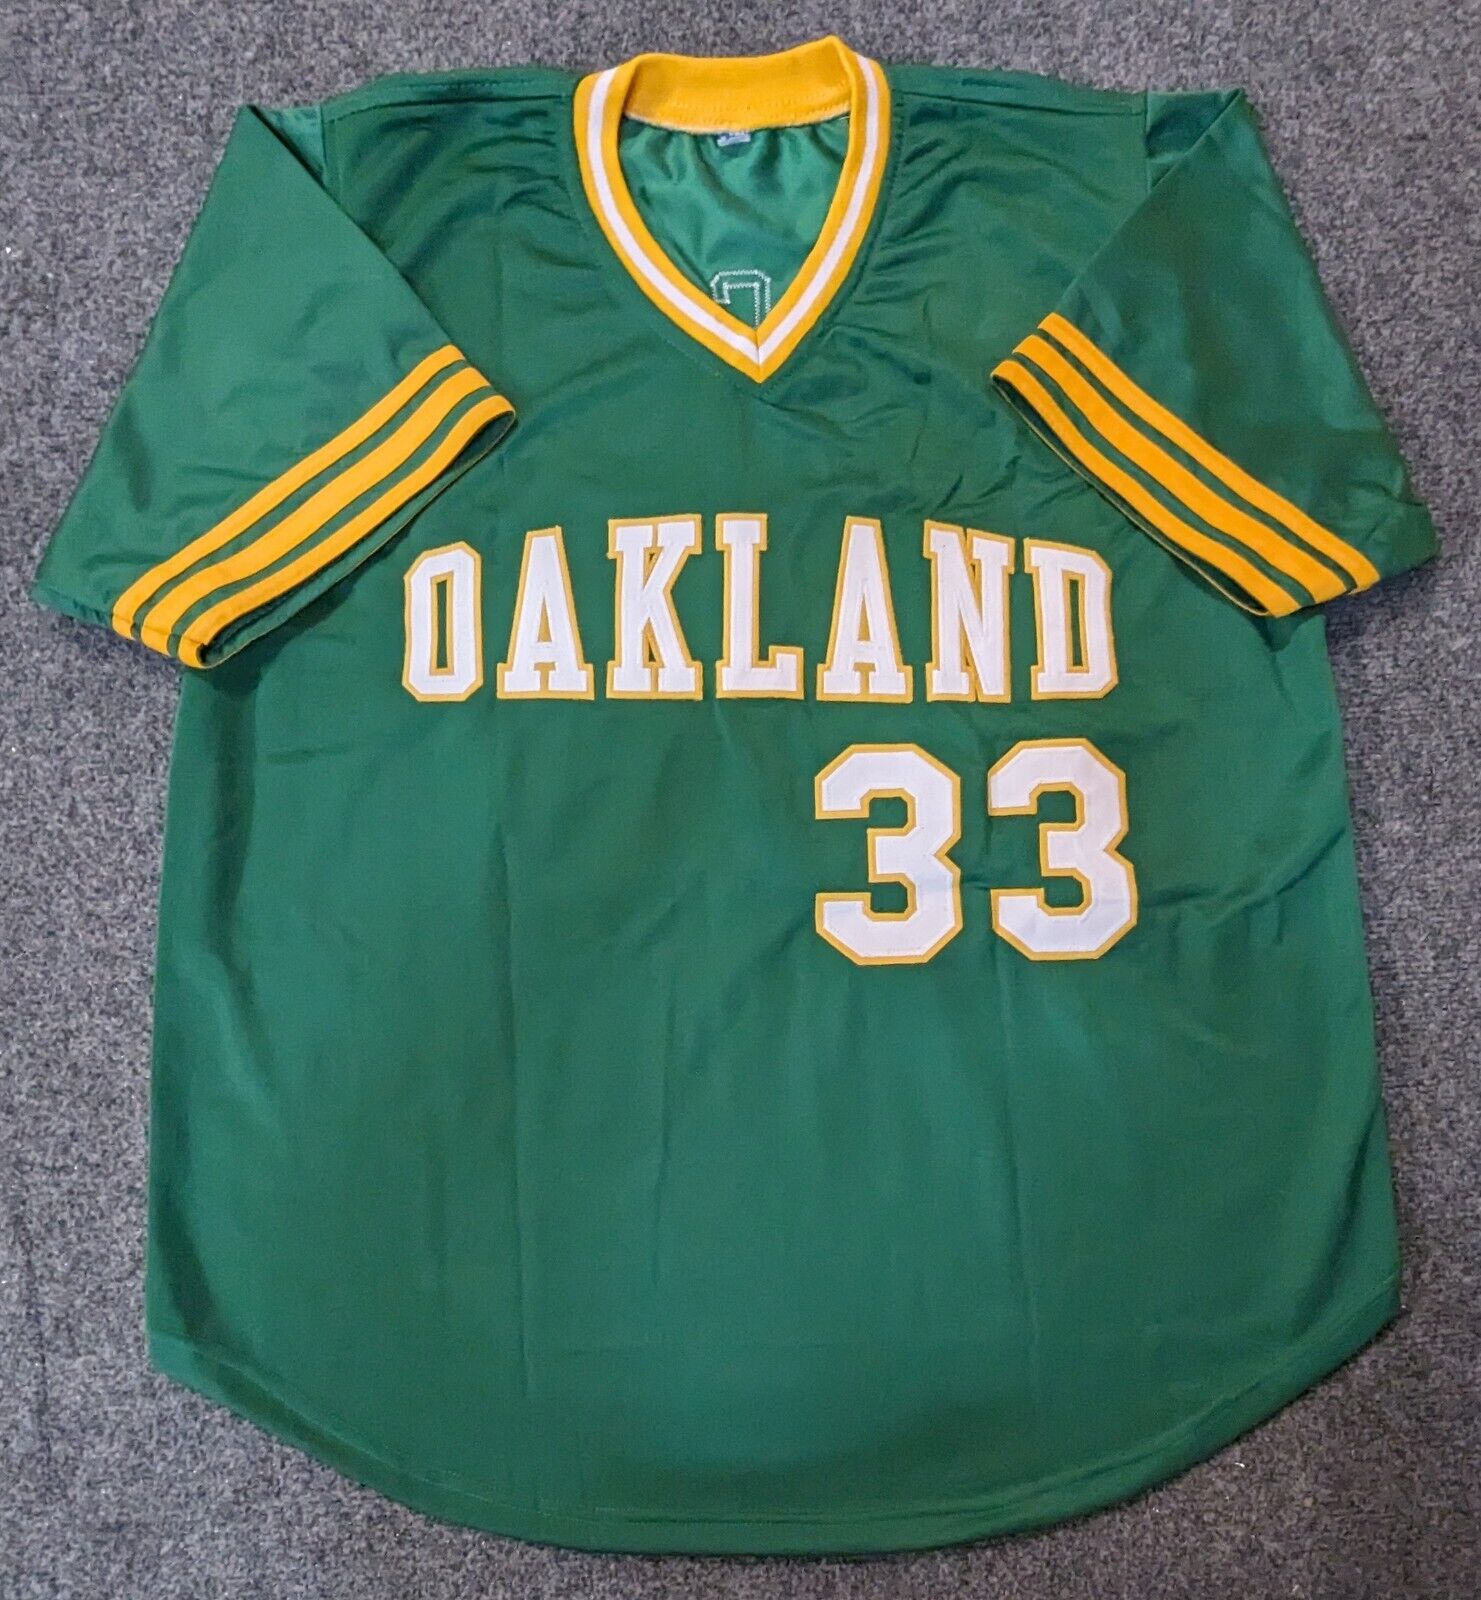 Oakland Athletics Jose Canseco Signed Jersey with